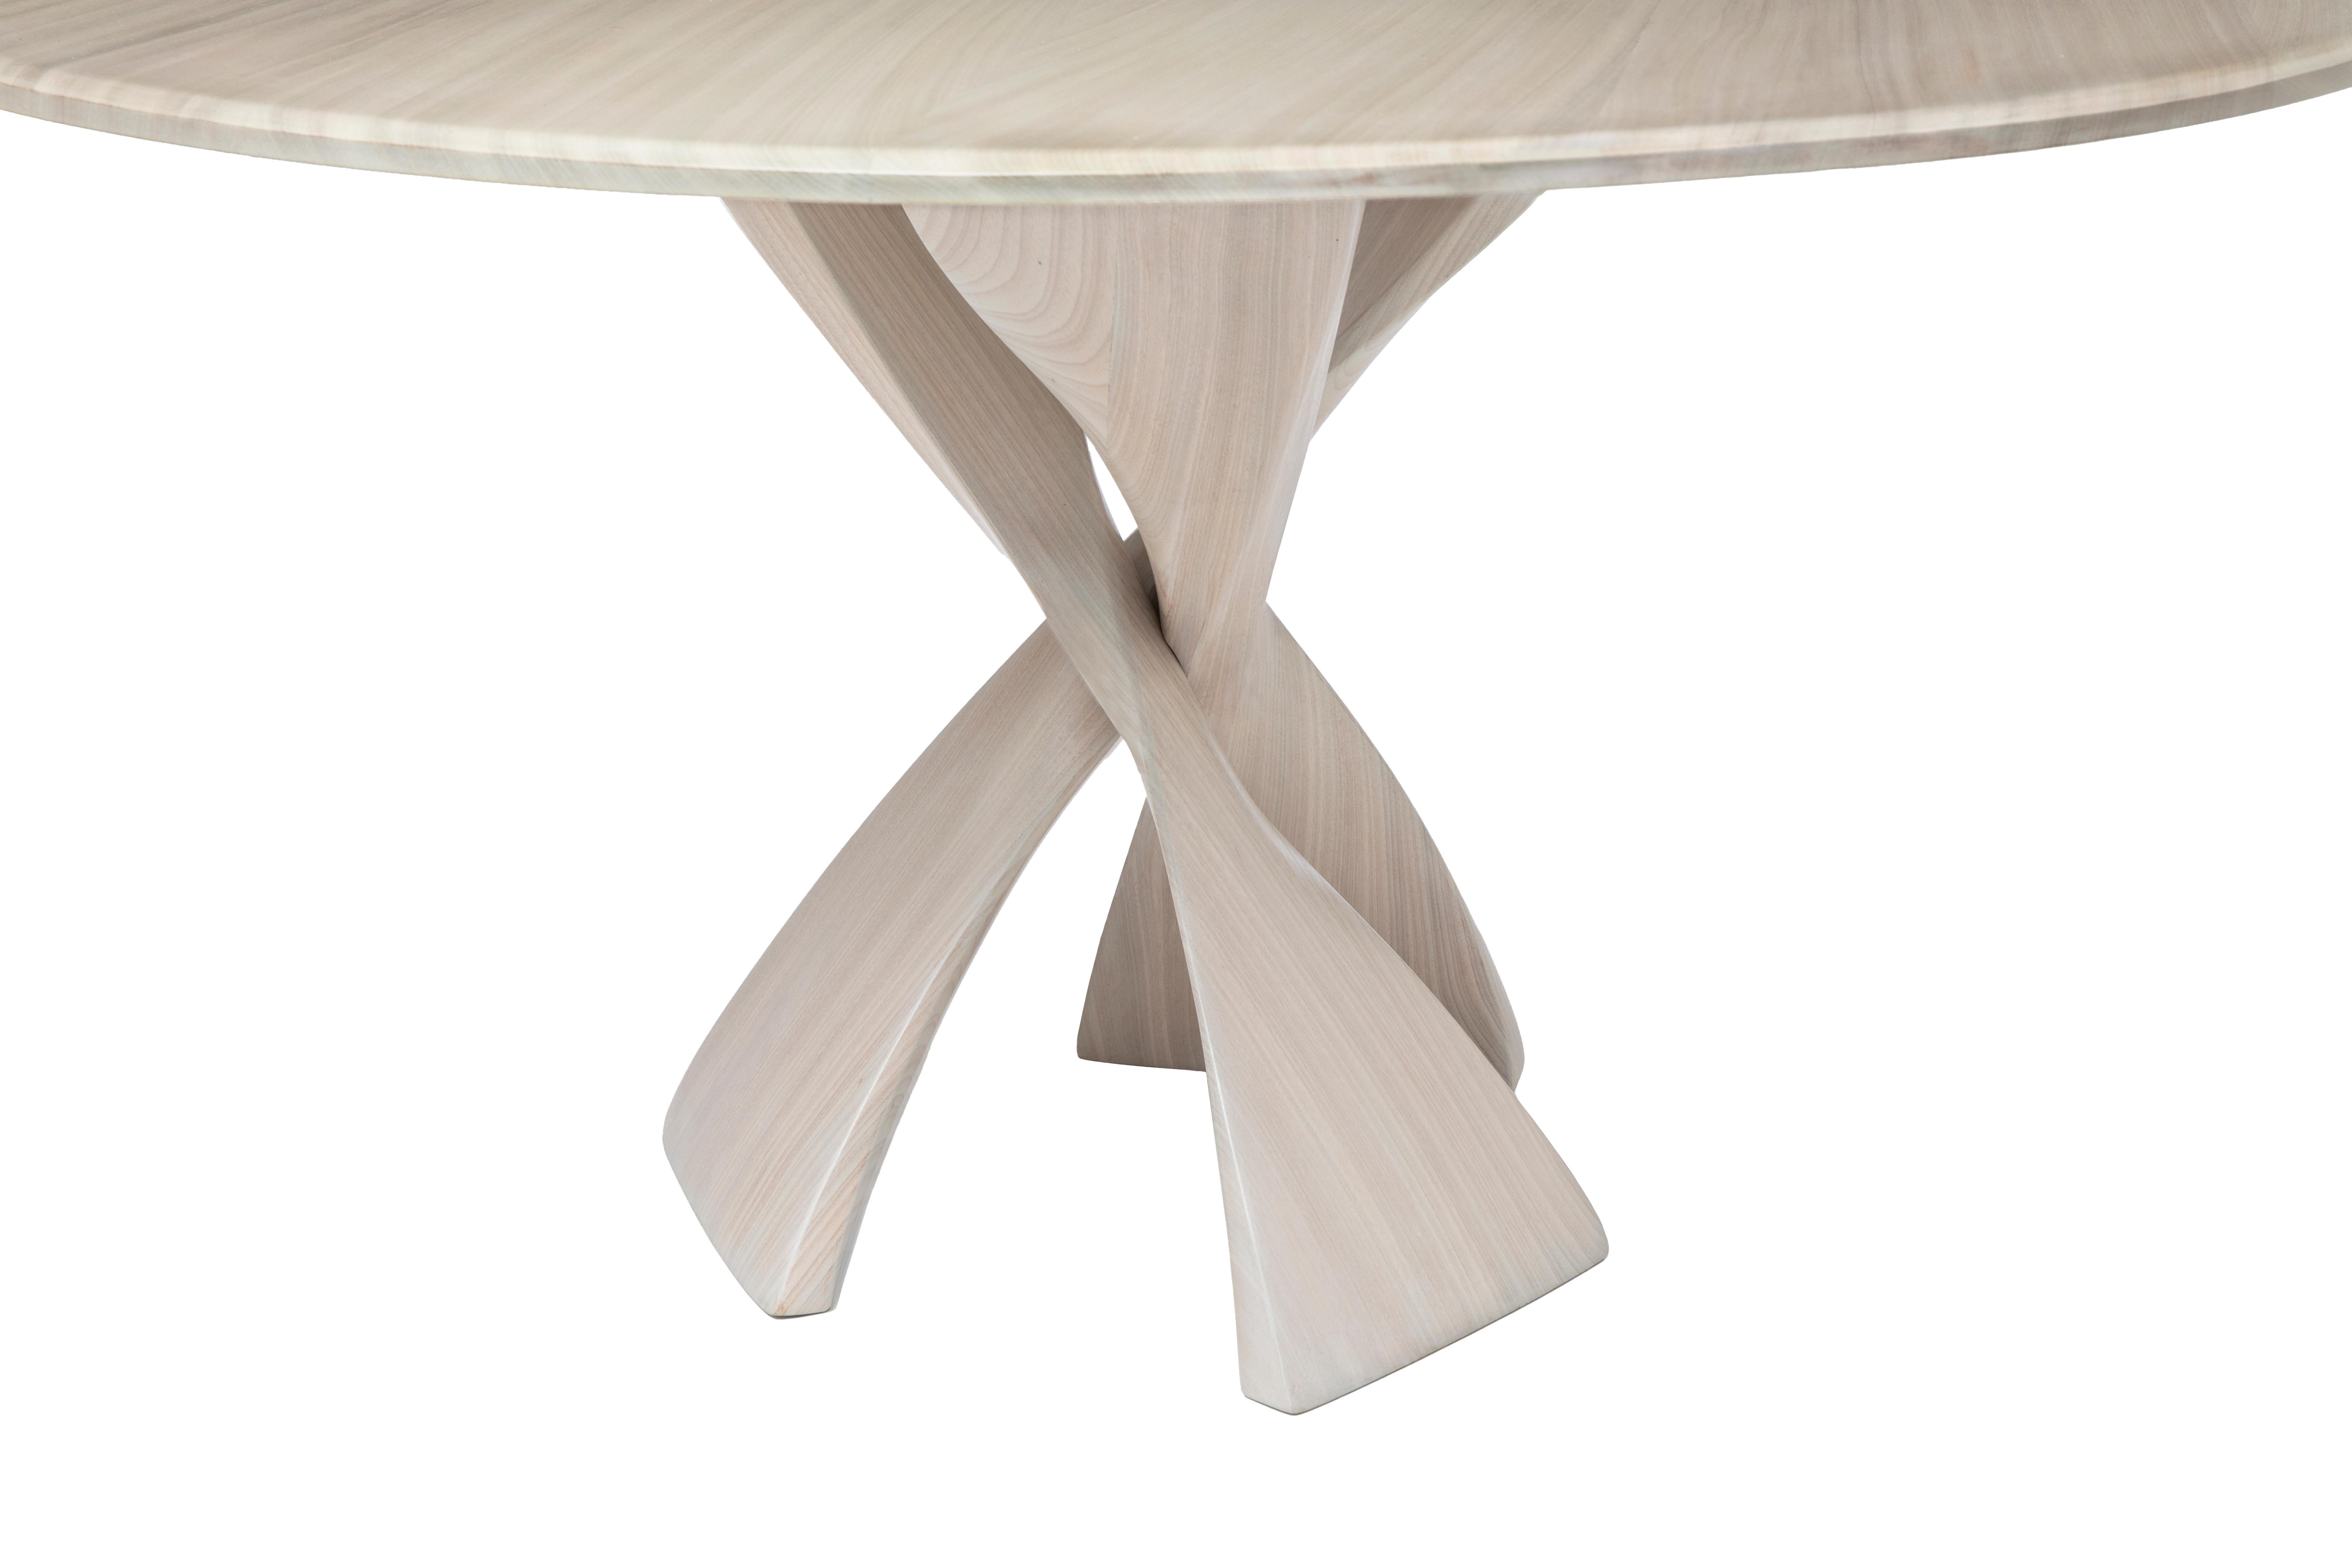 The AvA pedestal table is made up of three identical elements that twist around each other in a repeat pattern. The inspiration for the legs is reminiscent of The Evolution Stool design, also conceived and engineered by Vlad Krasnogorov. 
An